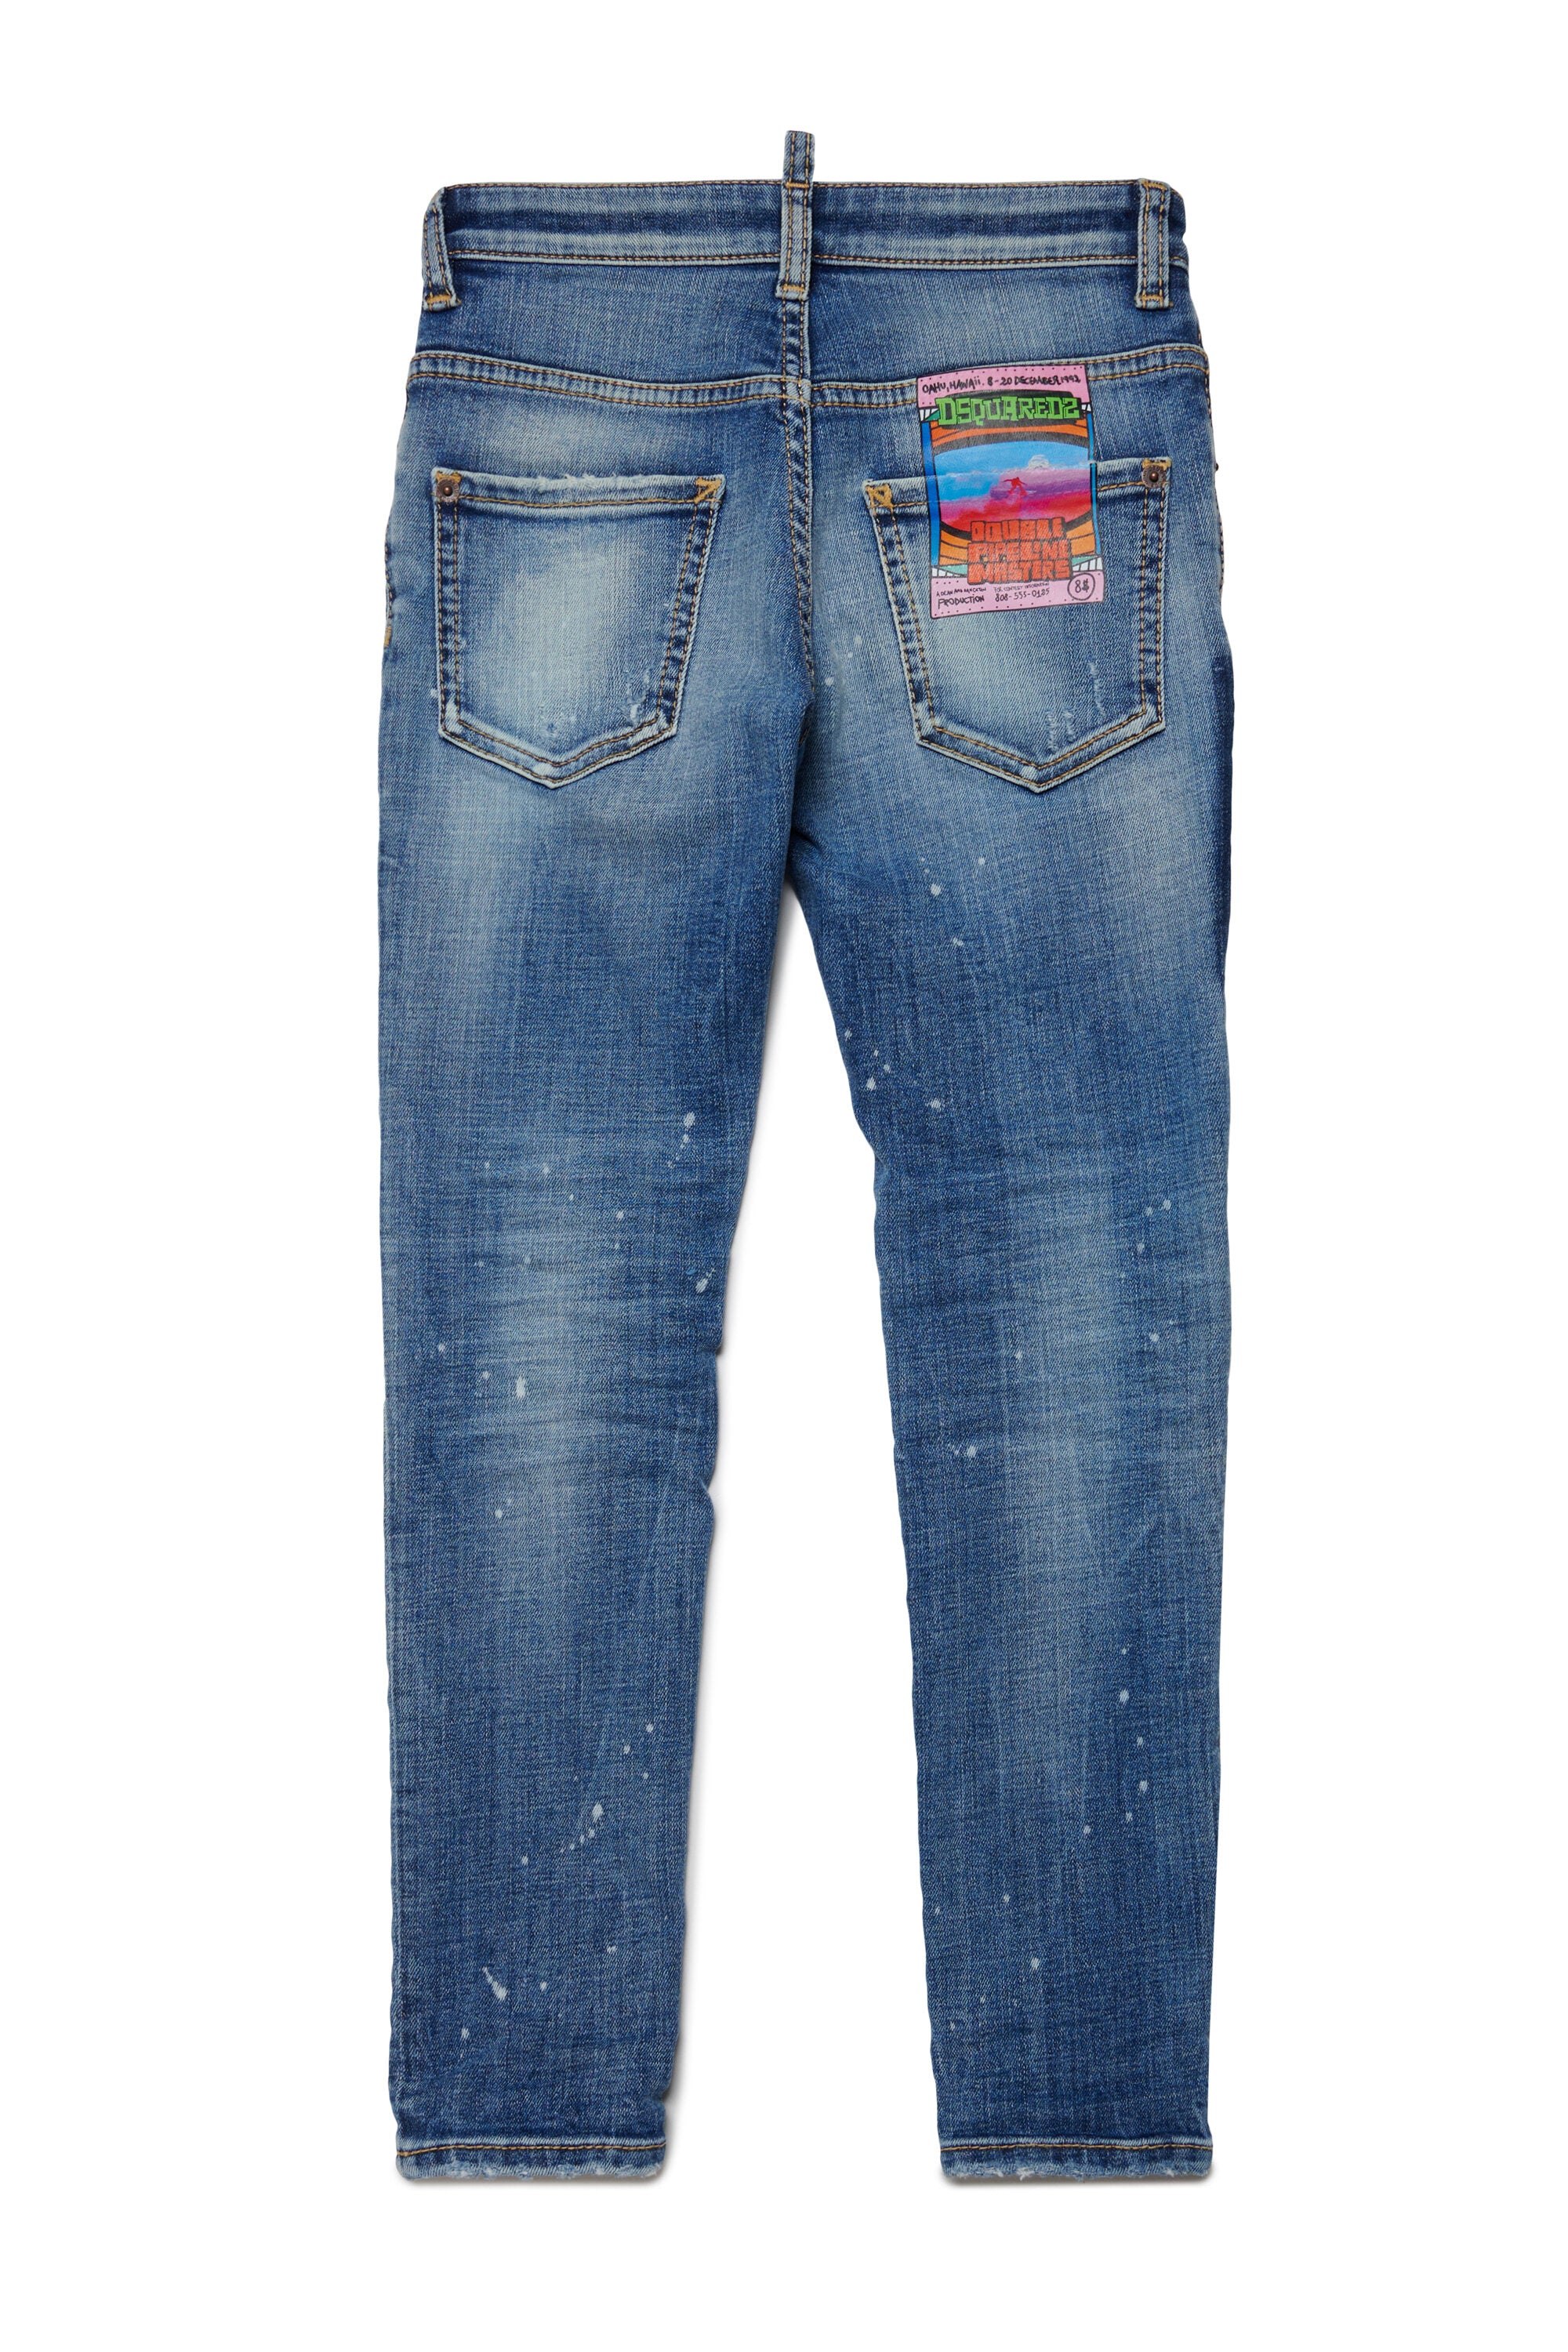 Shaded blue skinny jeans with breaks - Skater